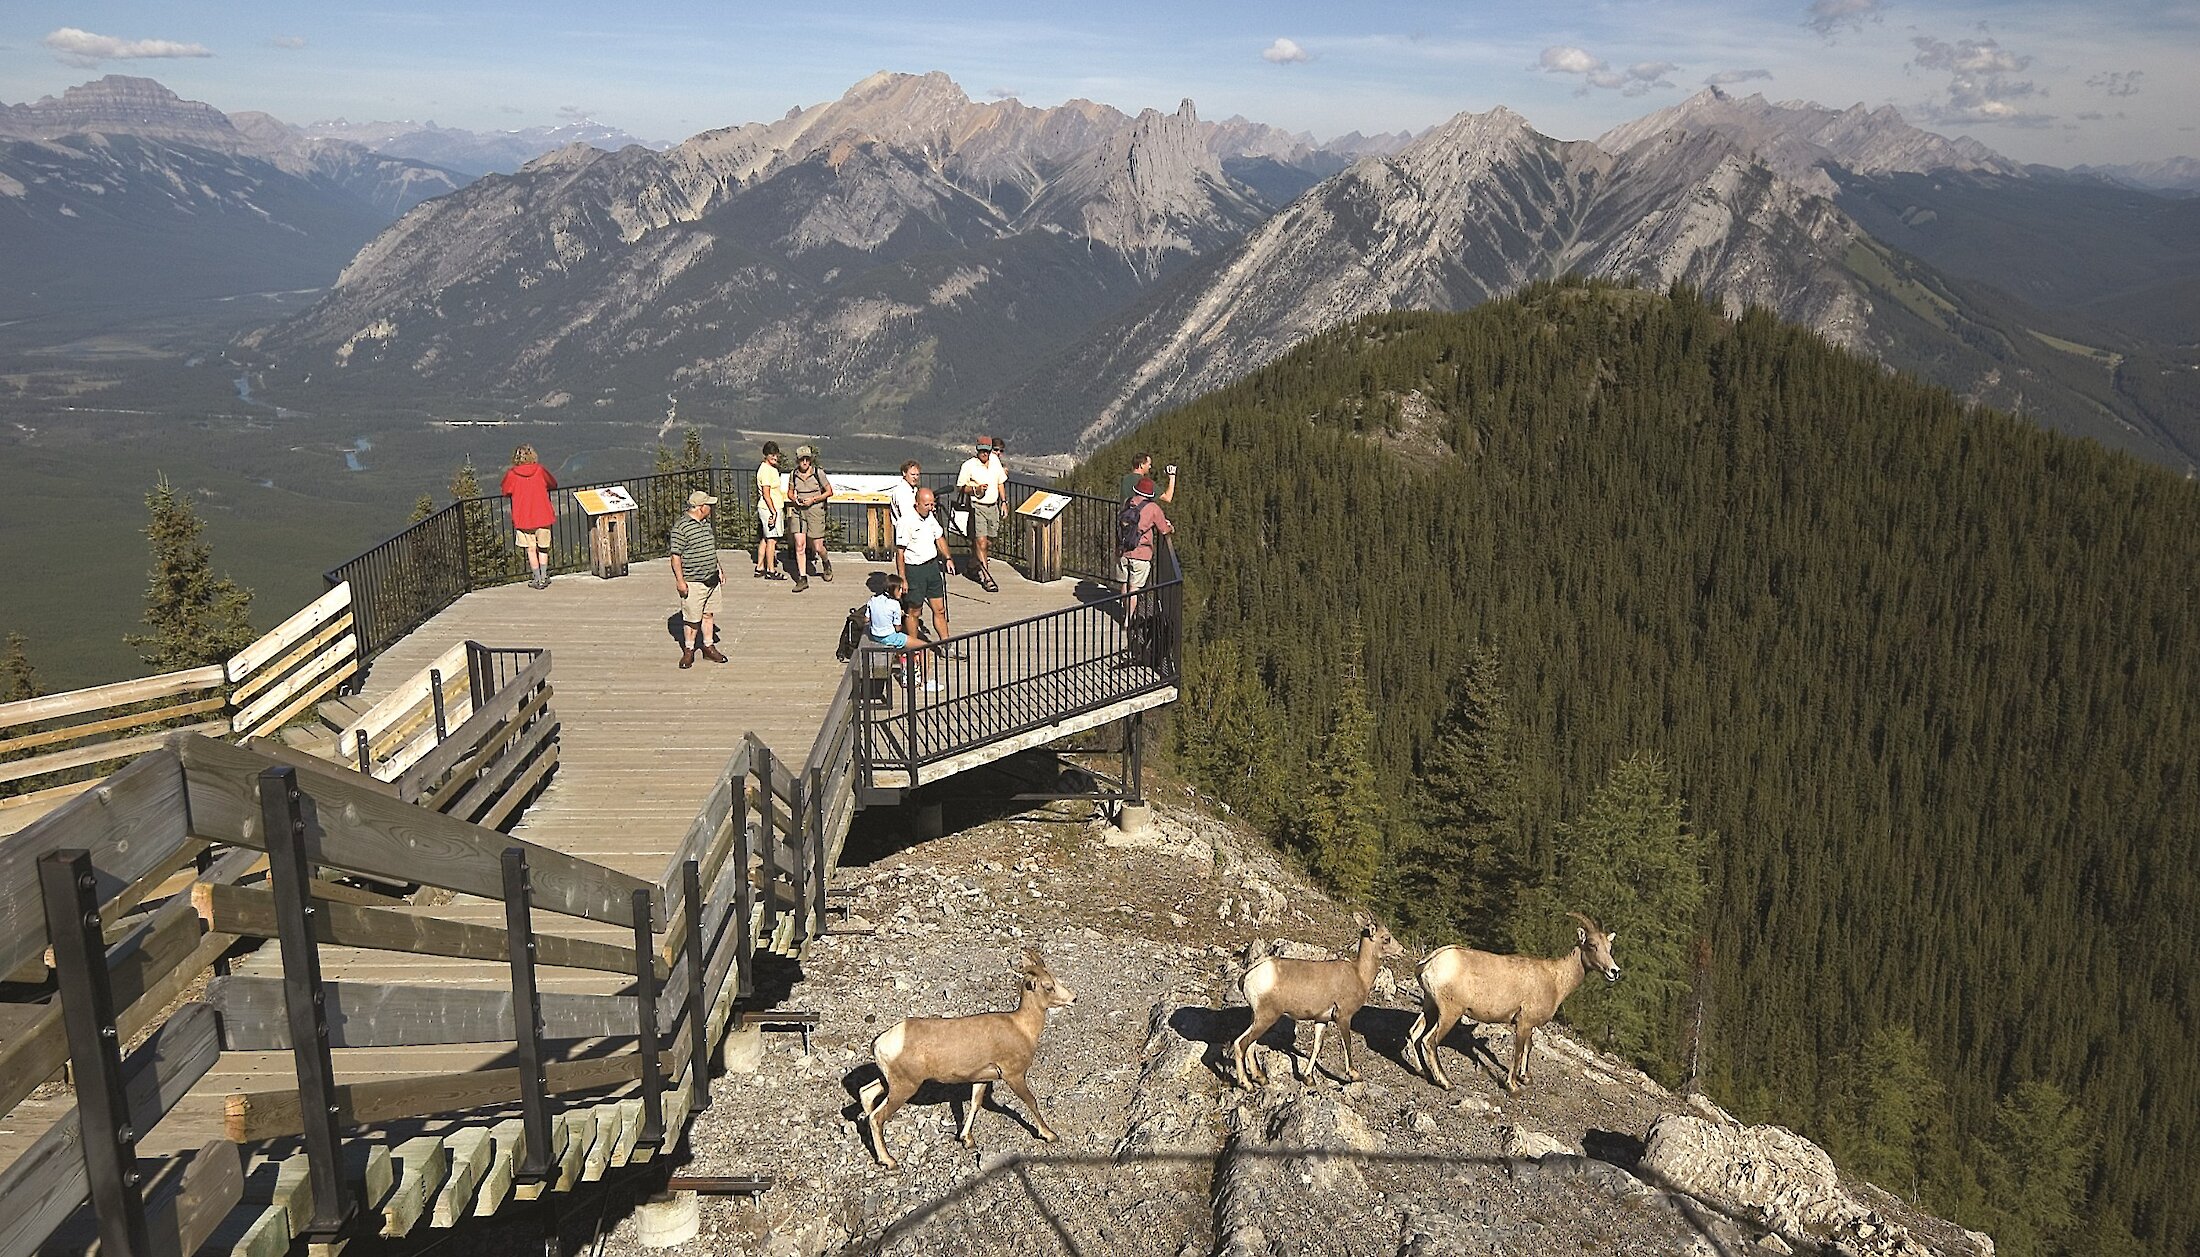 The boardwalk at the top of the Banff Gondola in summer